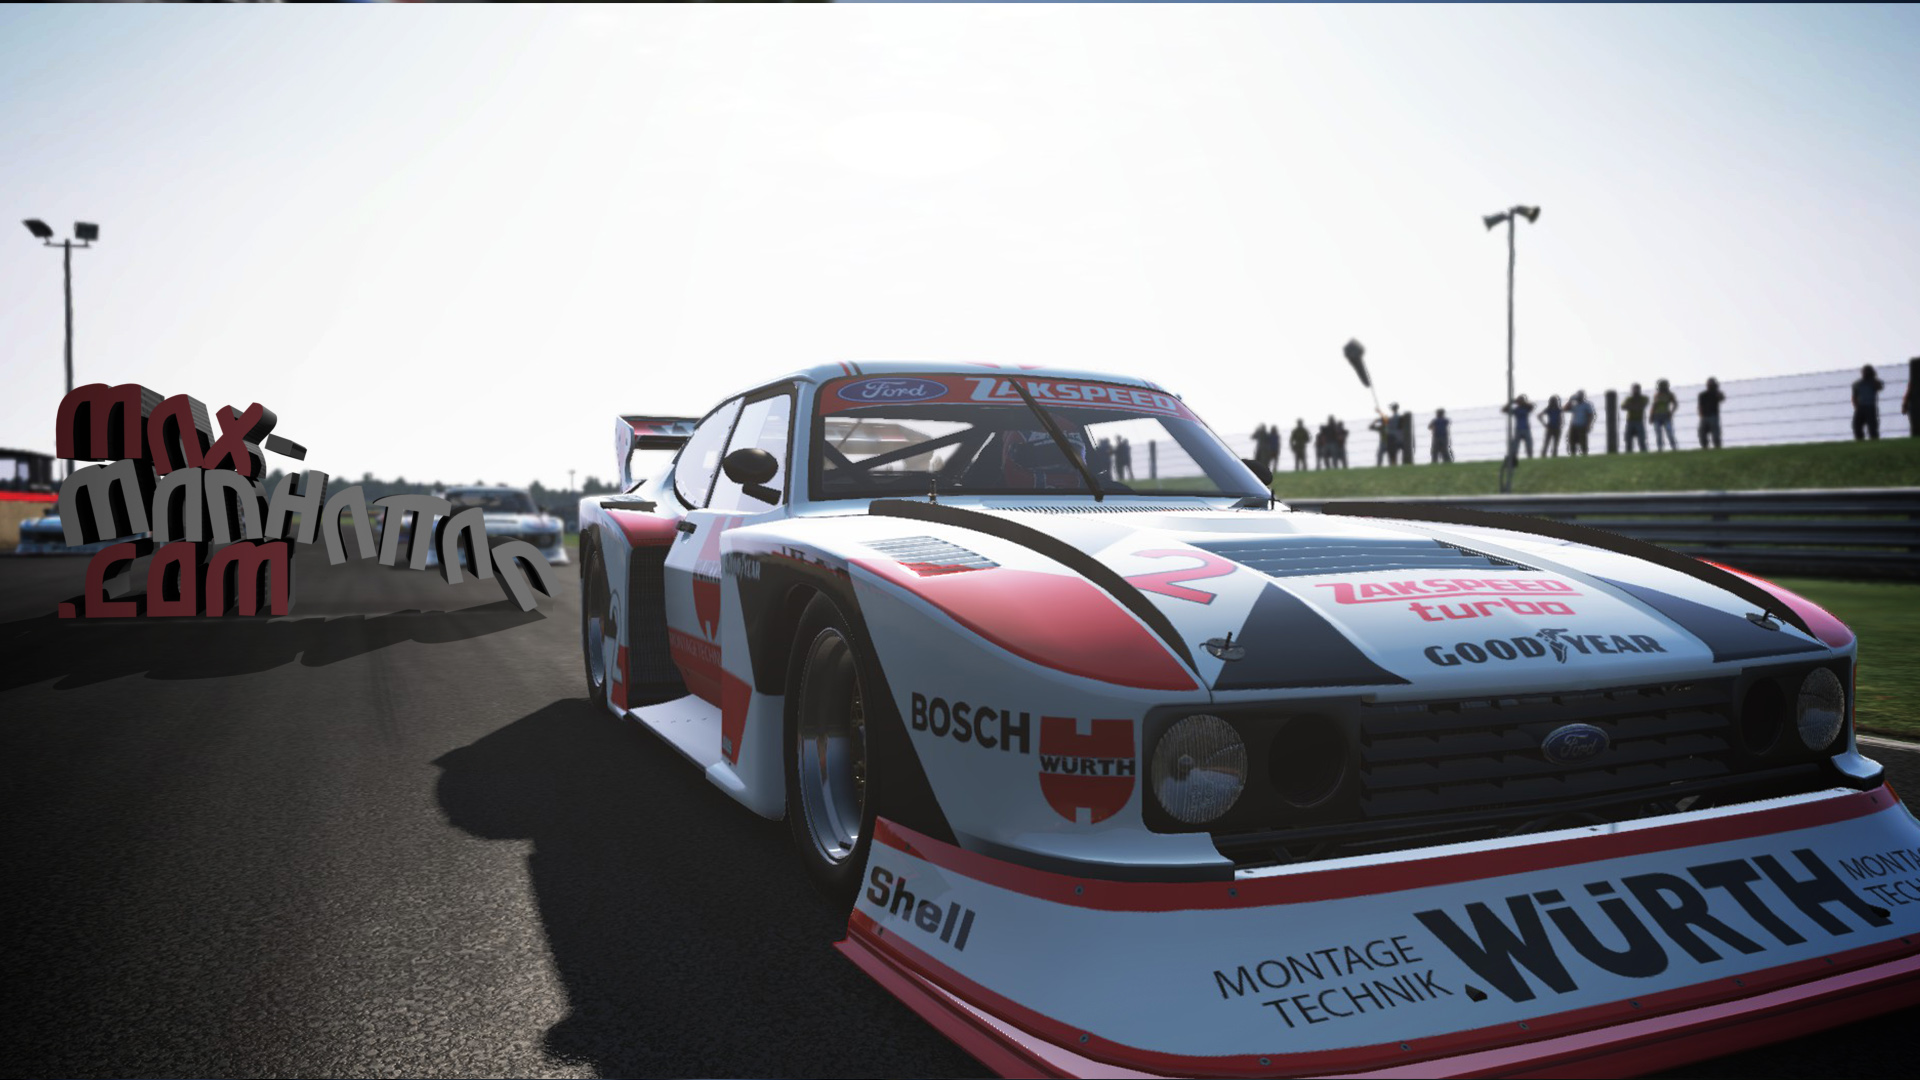 Ford Zakspeed Turbo DRM 1981 Skin for Project Cars painted by Markus Arnold alias MAxManhattan.jpg